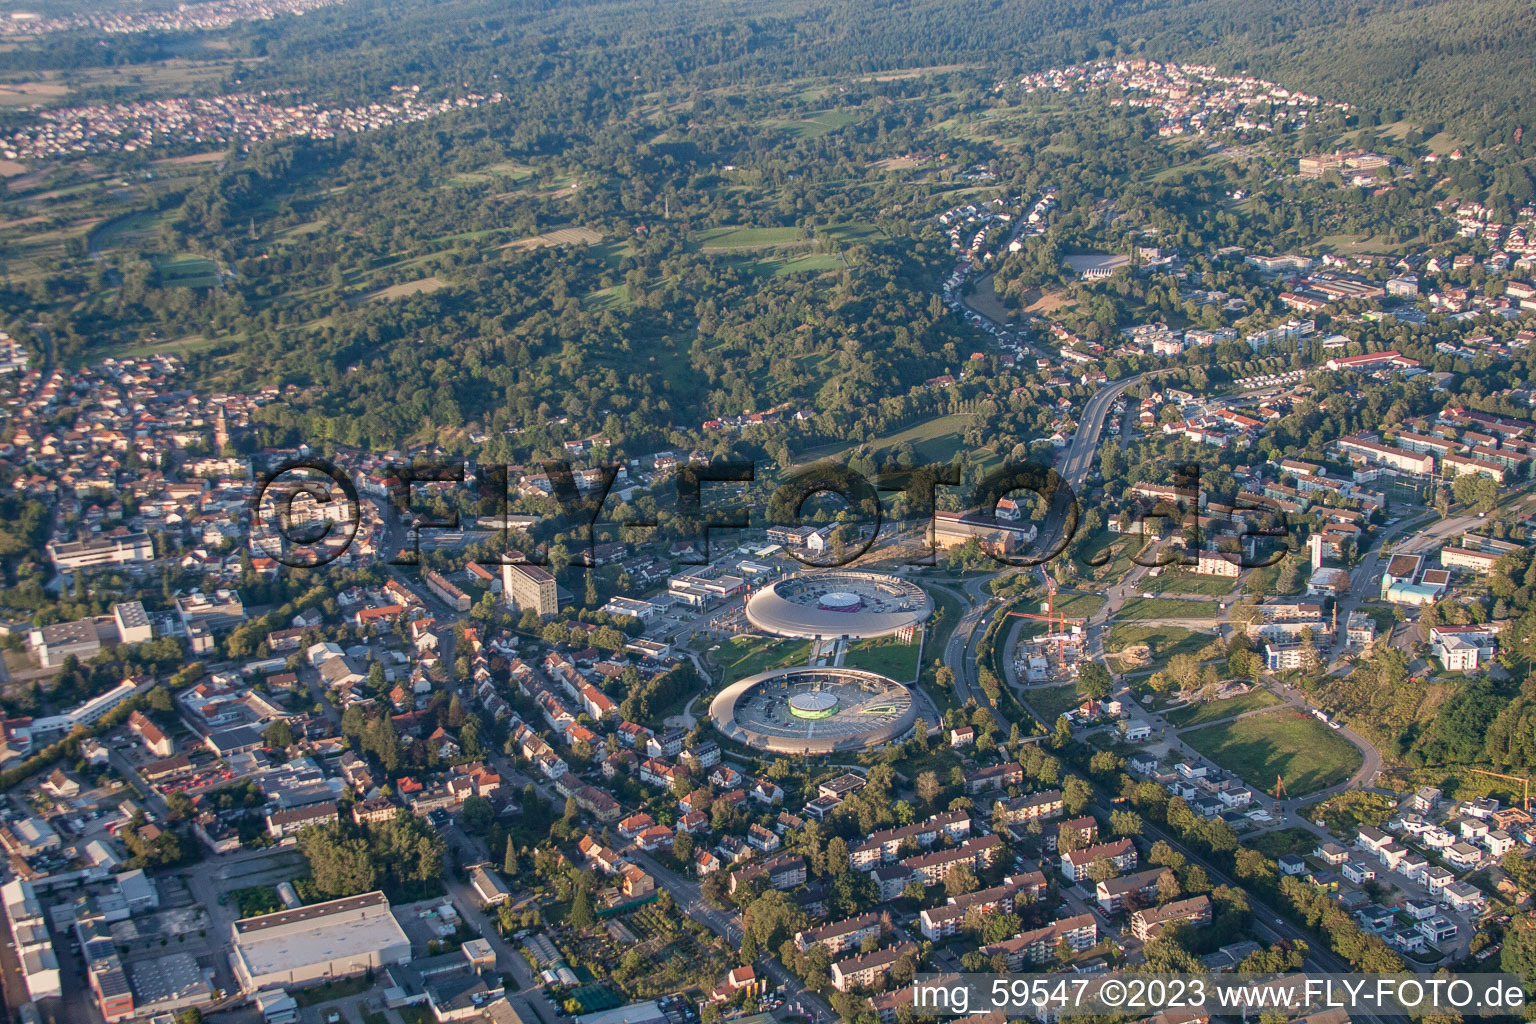 Aerial view of Shopping Cite from the southwest in the district Oos in Baden-Baden in the state Baden-Wuerttemberg, Germany